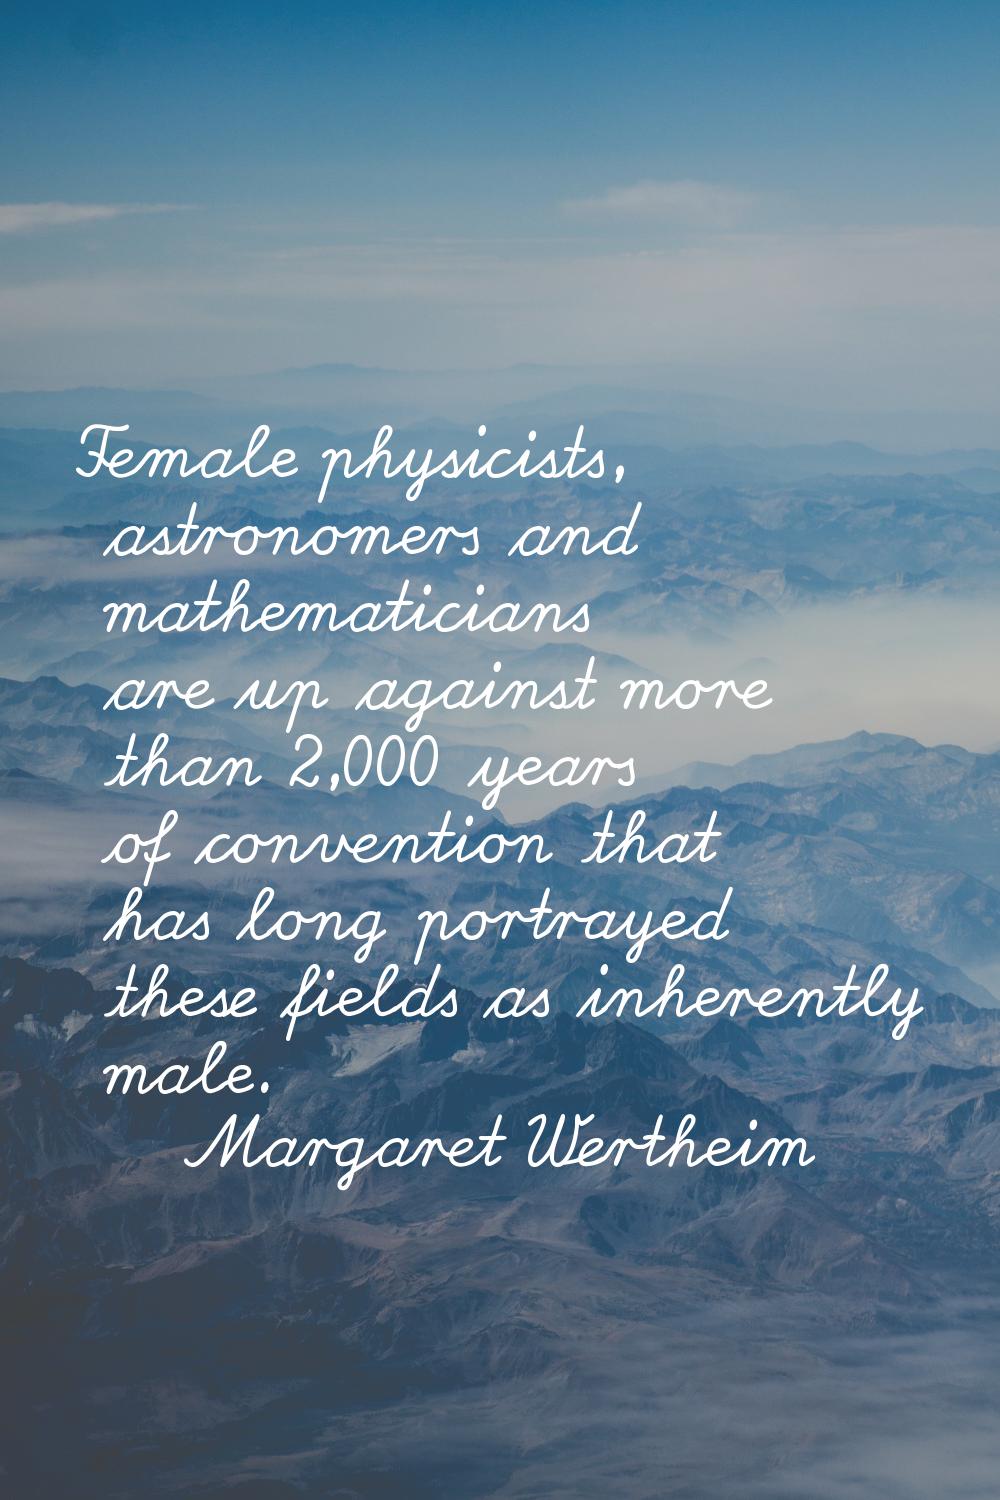 Female physicists, astronomers and mathematicians are up against more than 2,000 years of conventio